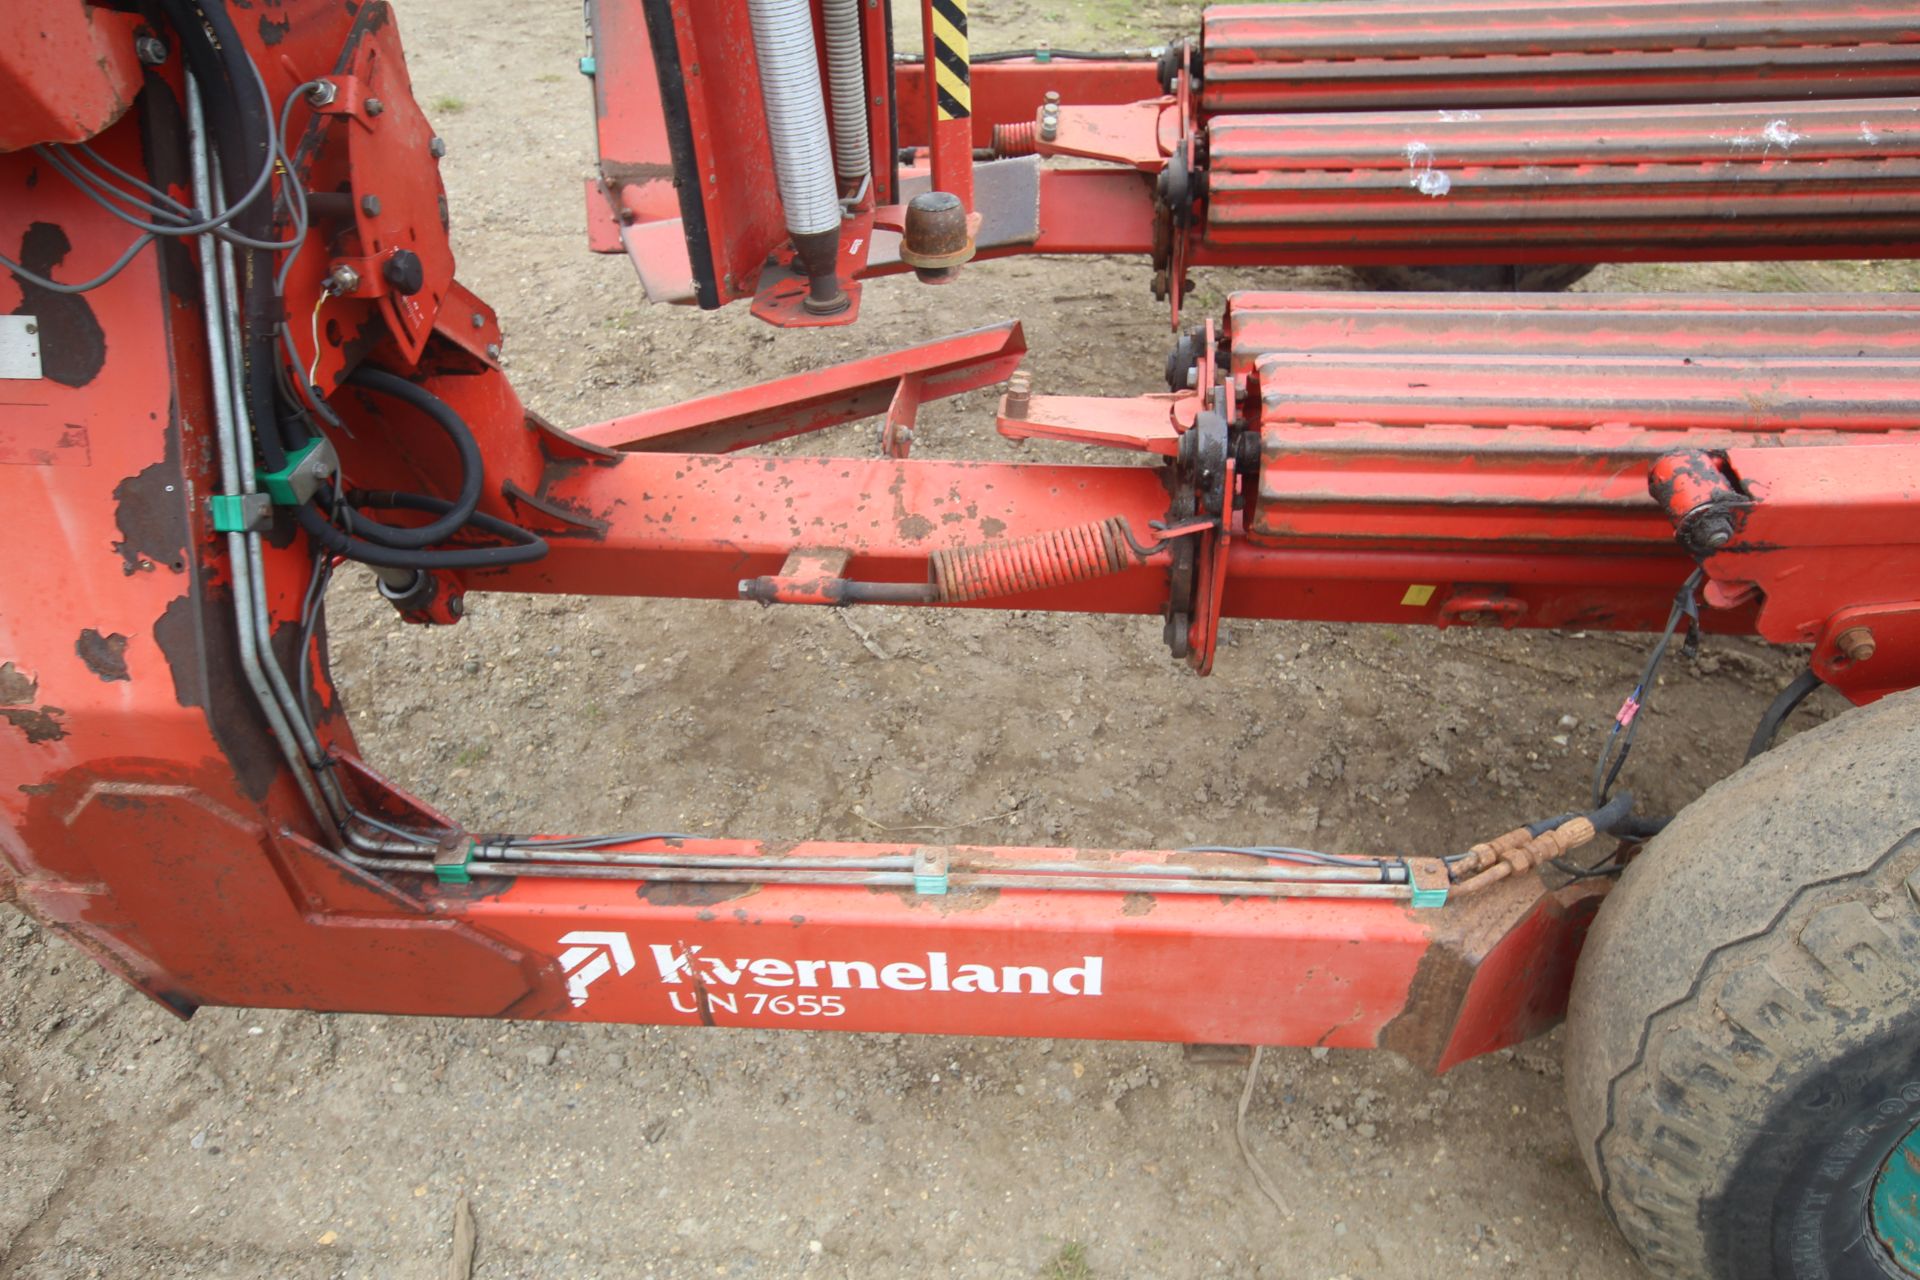 Kverneland Taruup UN7655 trailed square/ round bale wrapper. 1997. Control box held. V - Image 7 of 29